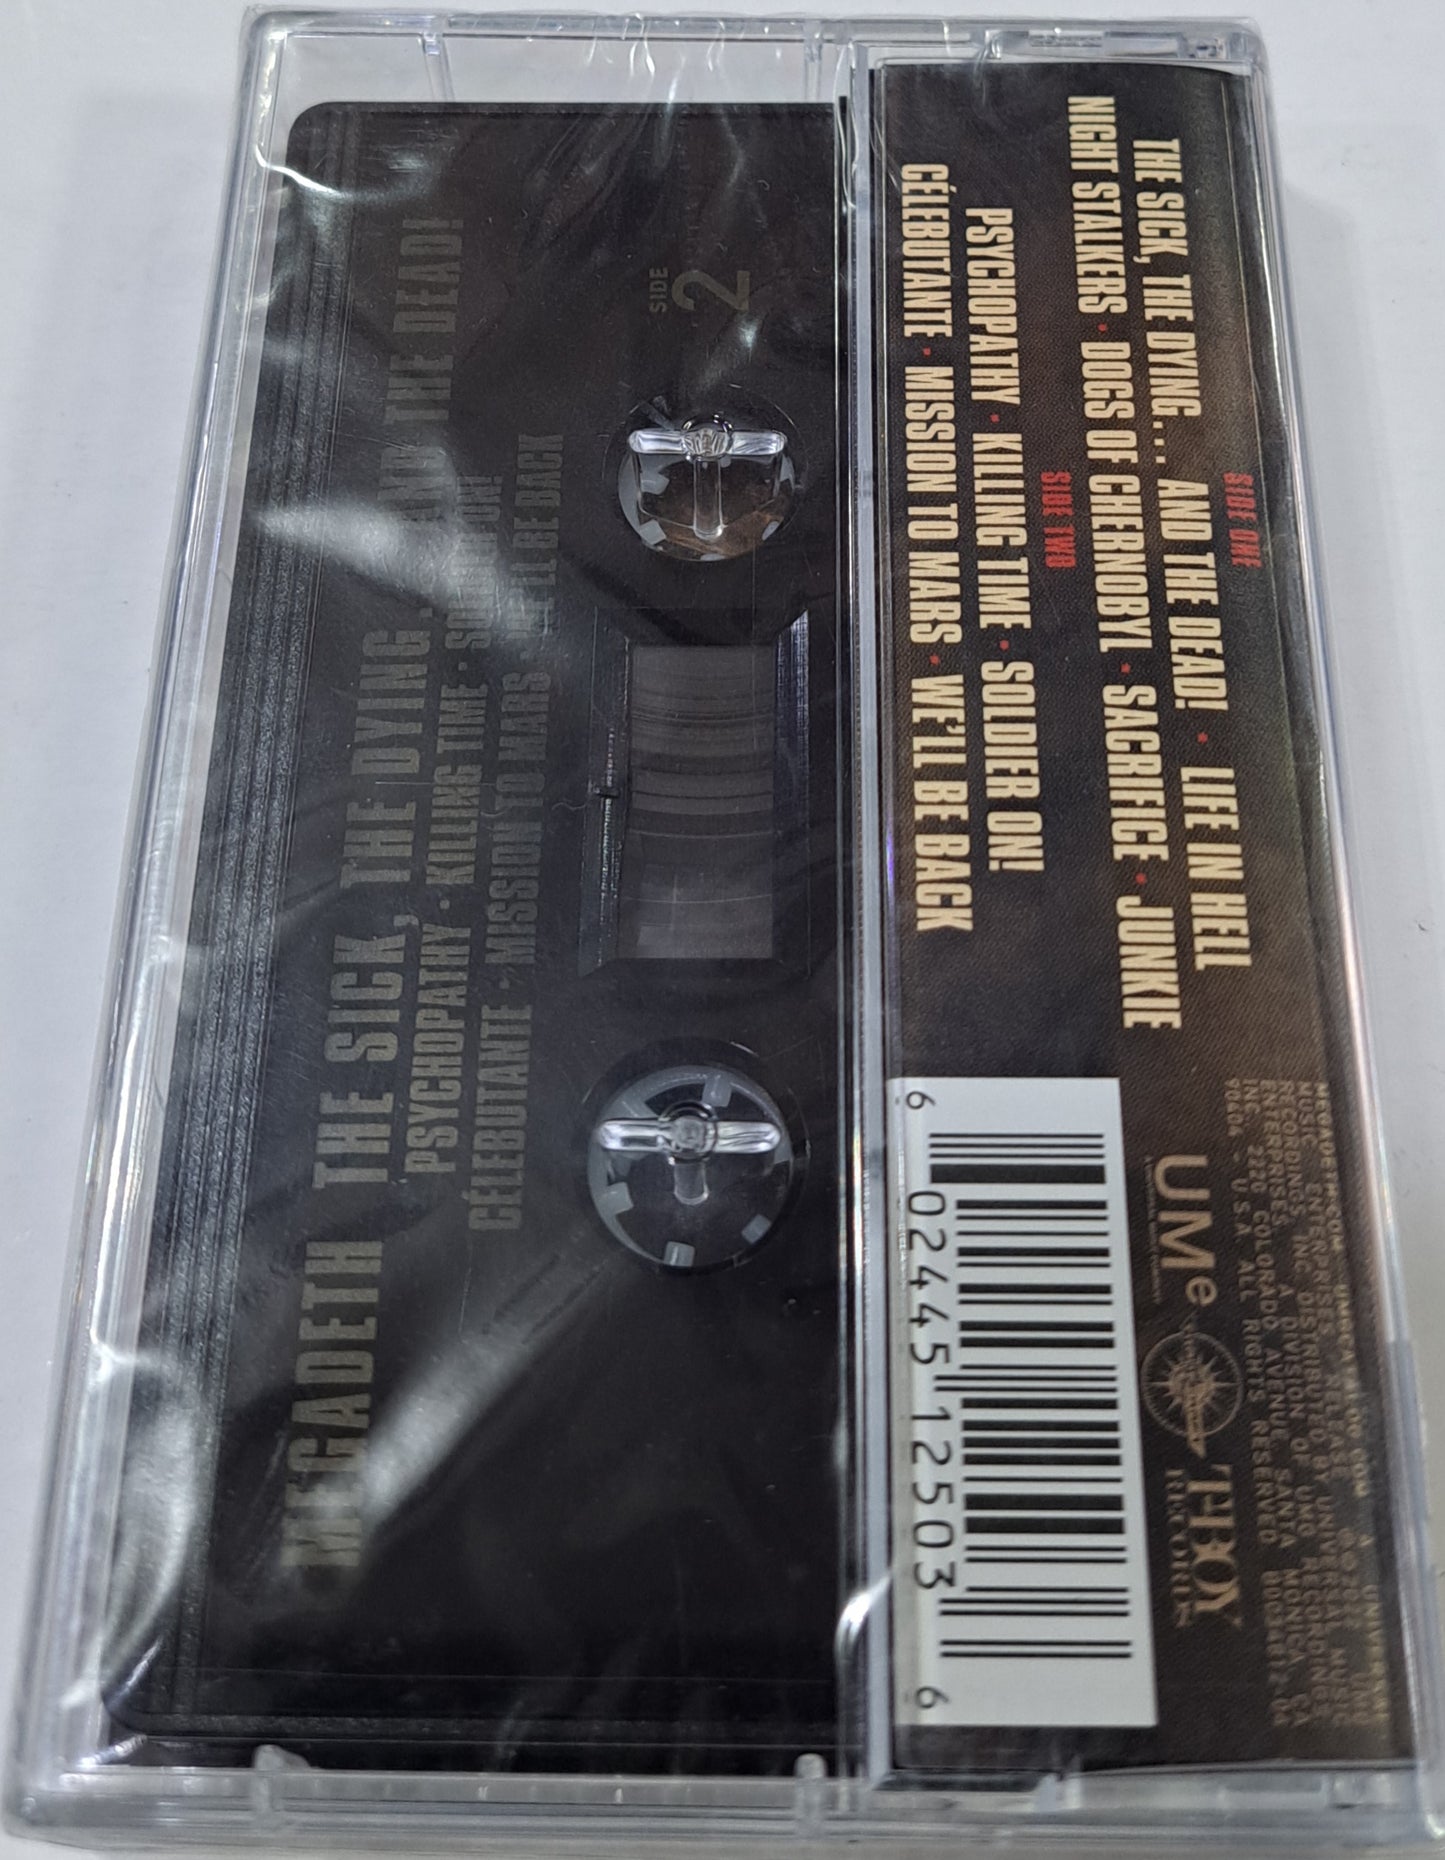 MEGADETH - THE SICK THE DYING AND THE DEAD CASSETTE